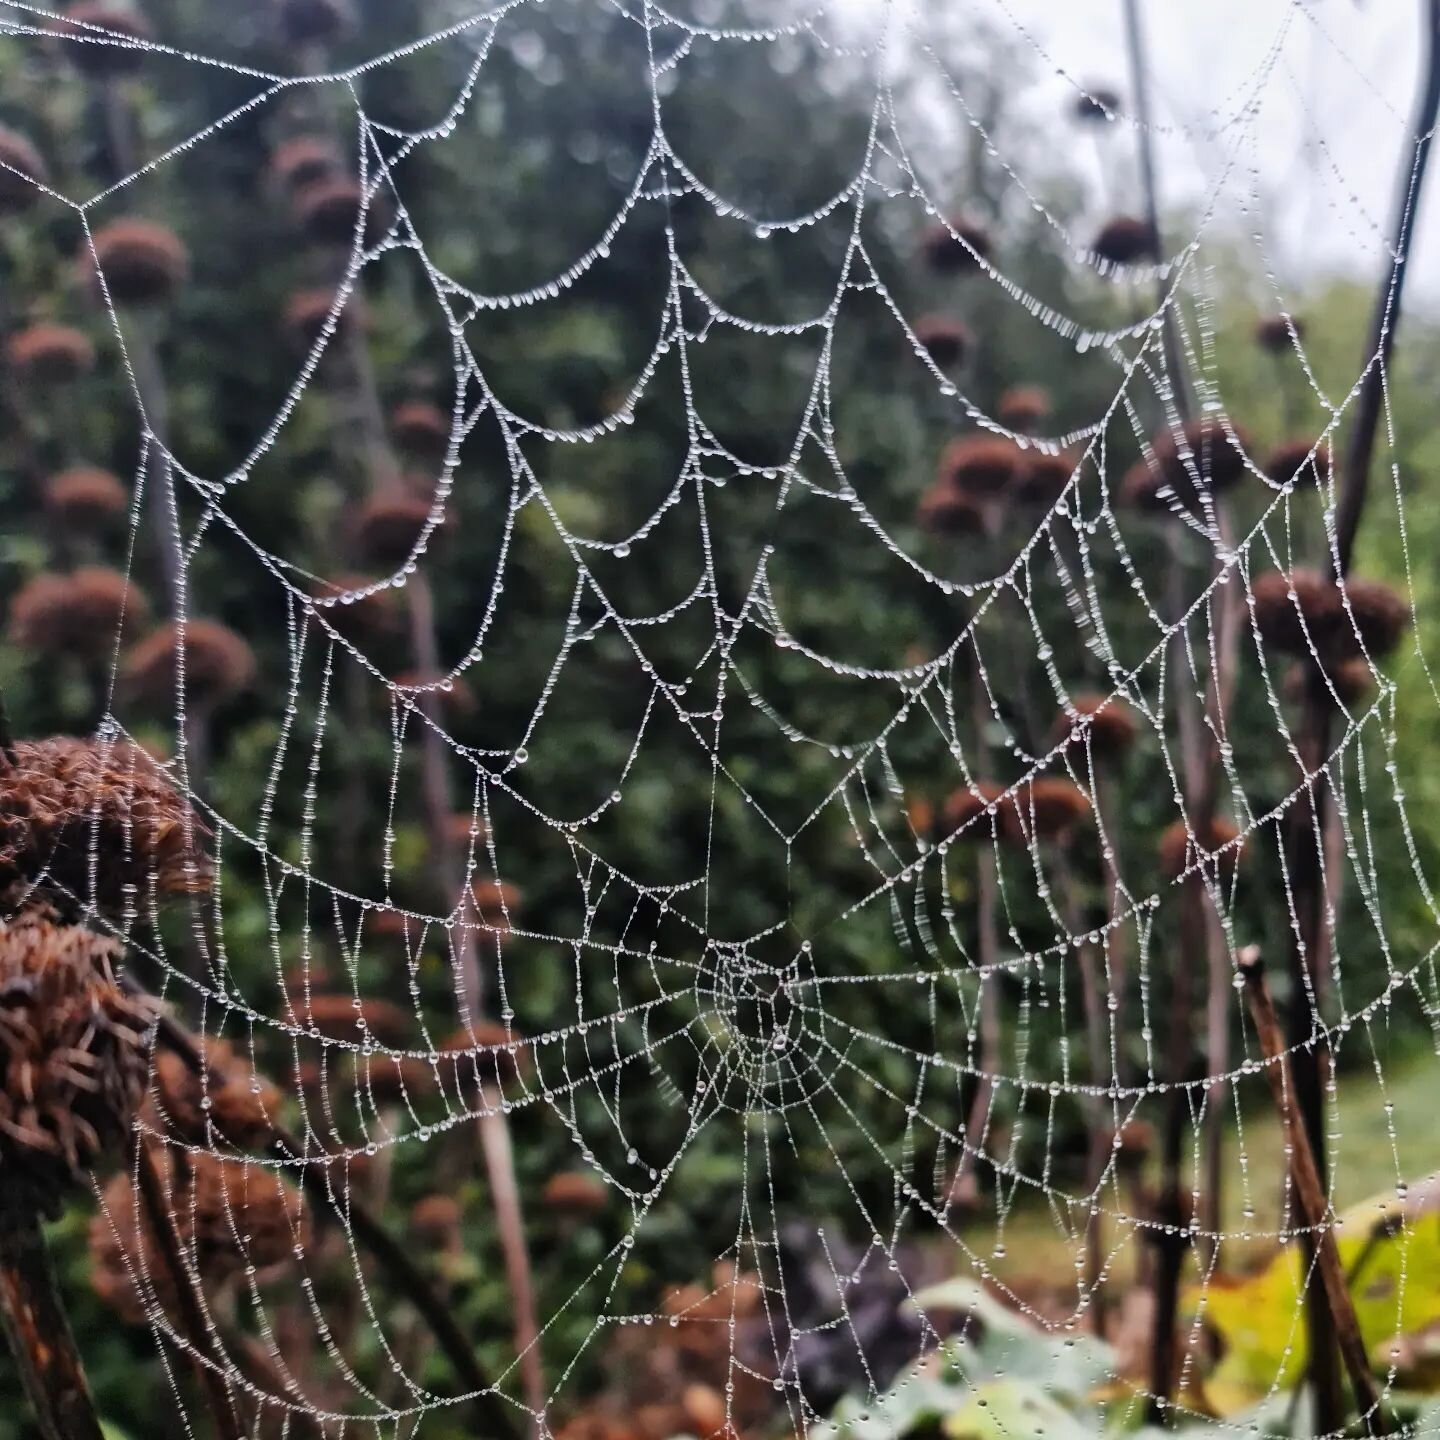 Winter rain that won't stop. Tough weather to be a spider in.